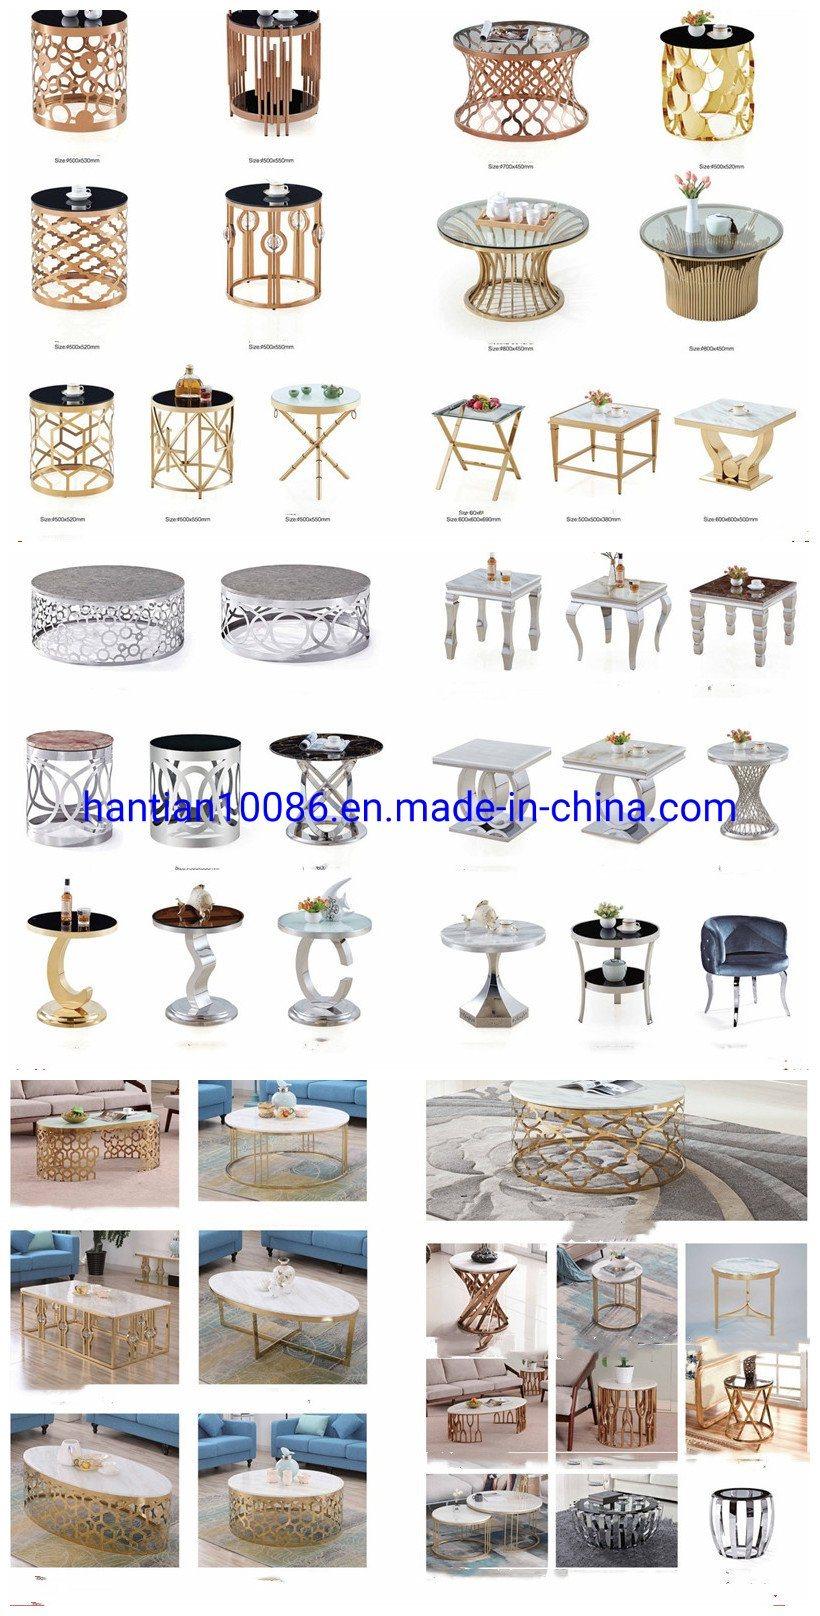 Curser Table Living Room Round Milk Colour Marble Coffee Table with Gold Frame